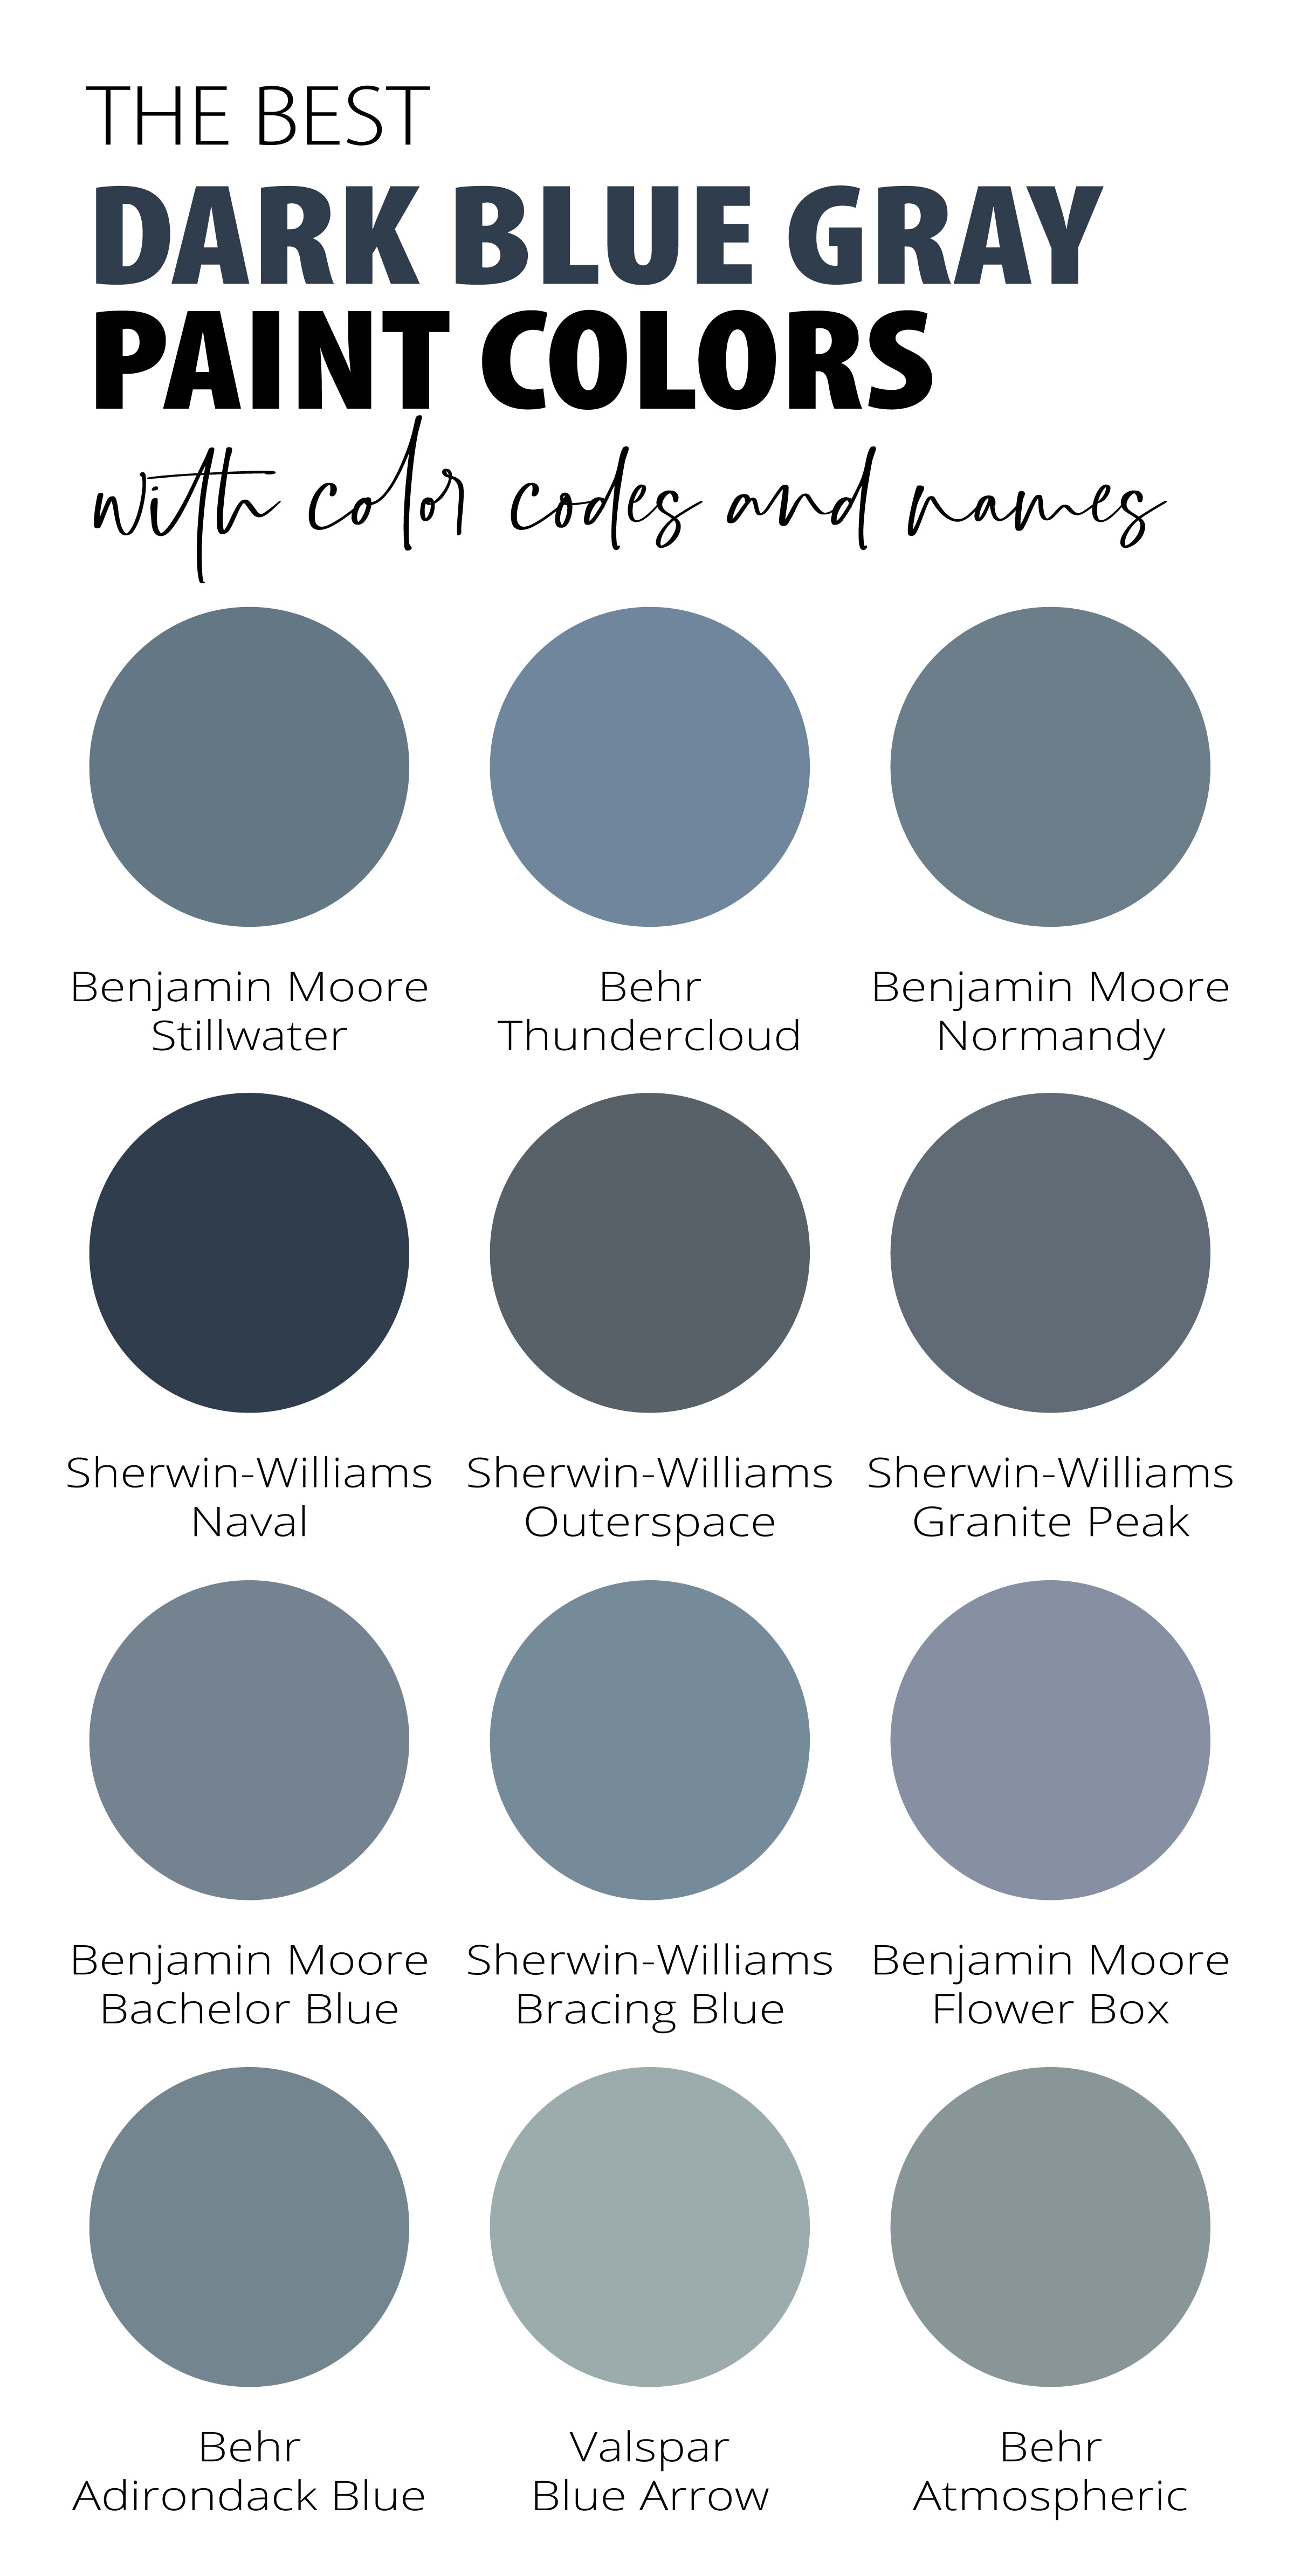 Best-Dark-Blue-Gray-Paint-Colors-with-Names